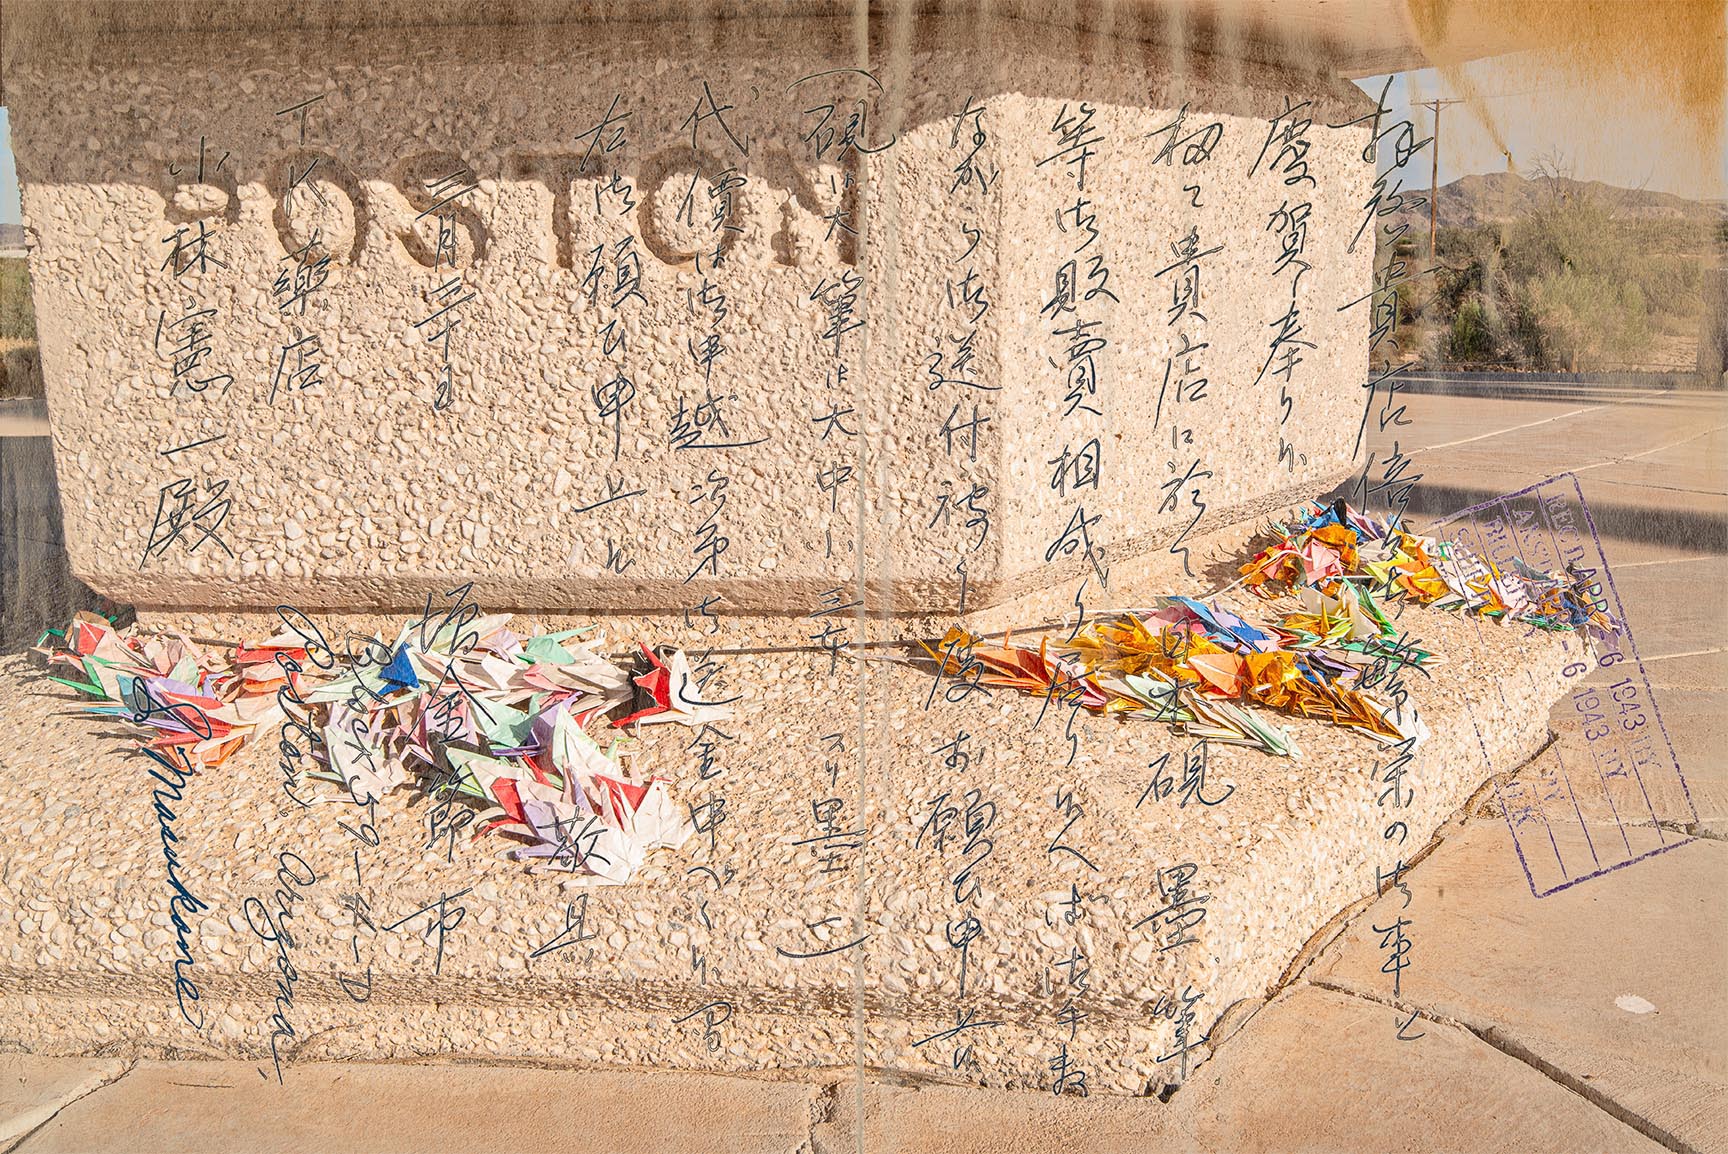 A photomontage created by Dean K. Terasaki from two images. One is a detail of the Poston Concentration Camp Monument. The other is a request for inkstone, ink and brushes in a Japanese-language letter sent to T.K. Pharmacy.